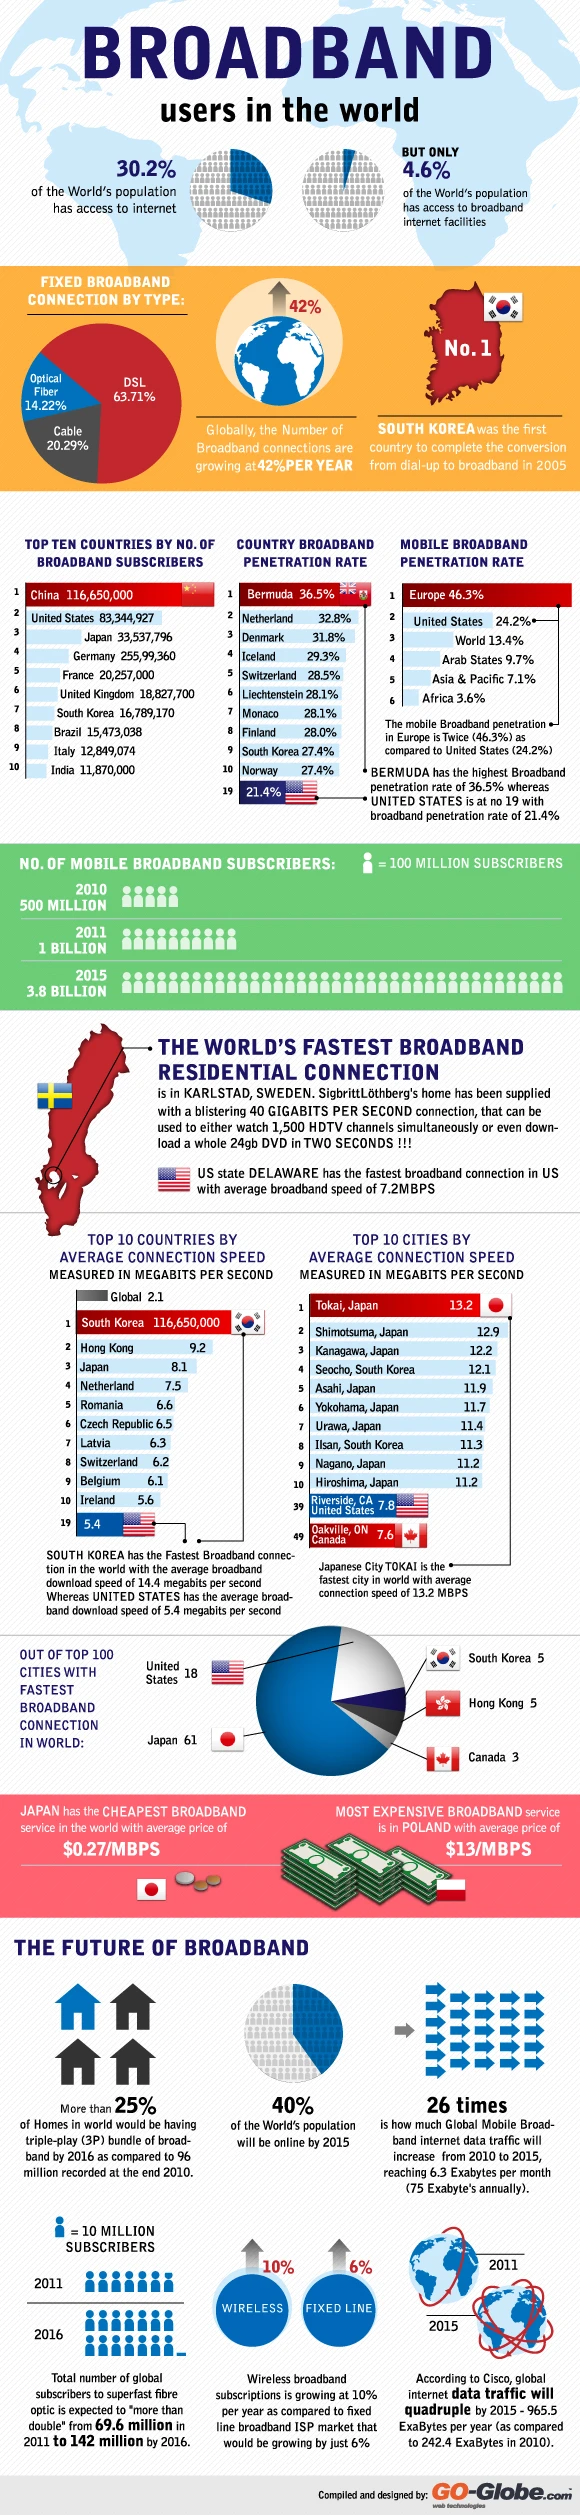 Broadband Users In The World - Facts And Statistics 